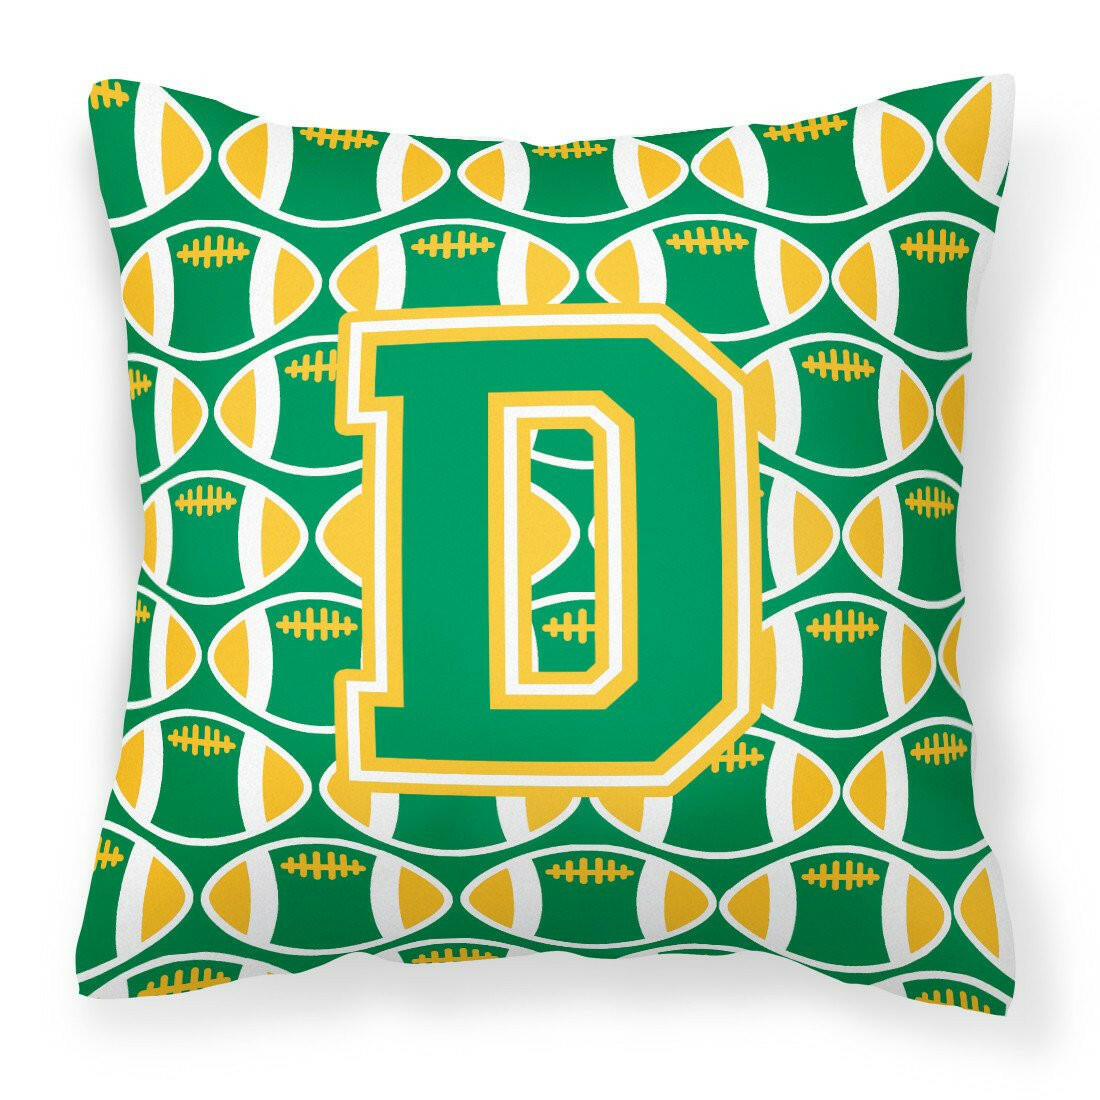 Letter D Football Green and Gold Fabric Decorative Pillow CJ1069-DPW1414 by Caroline's Treasures